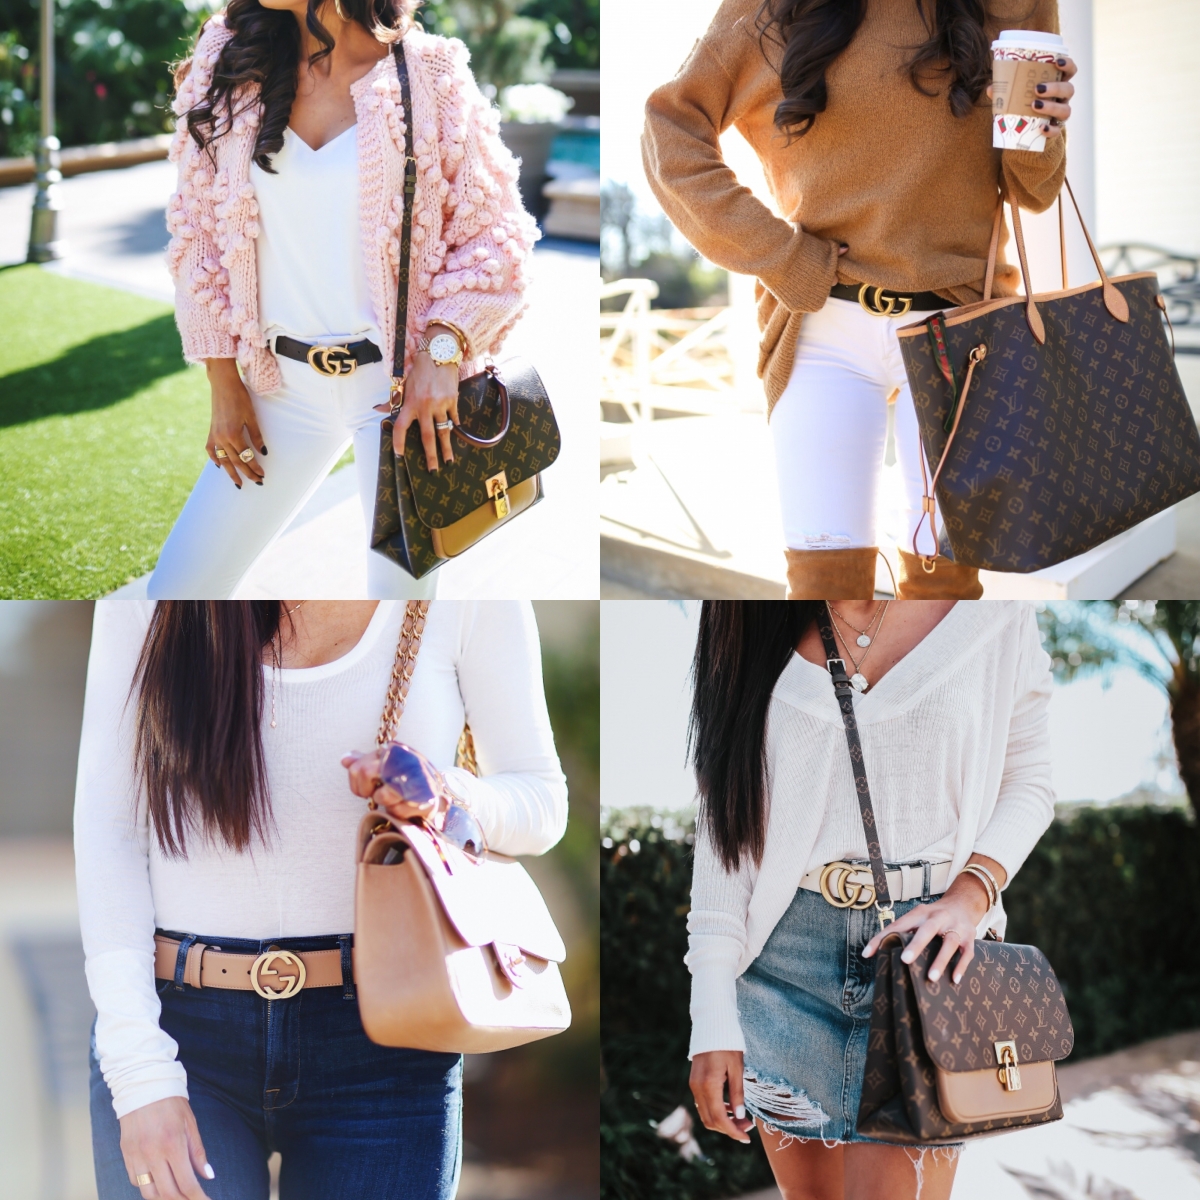 Gucci Belt Sizing by popular US fashion blog, The Sweetest Thing: collage image of a woman wearing a Gucci belt.